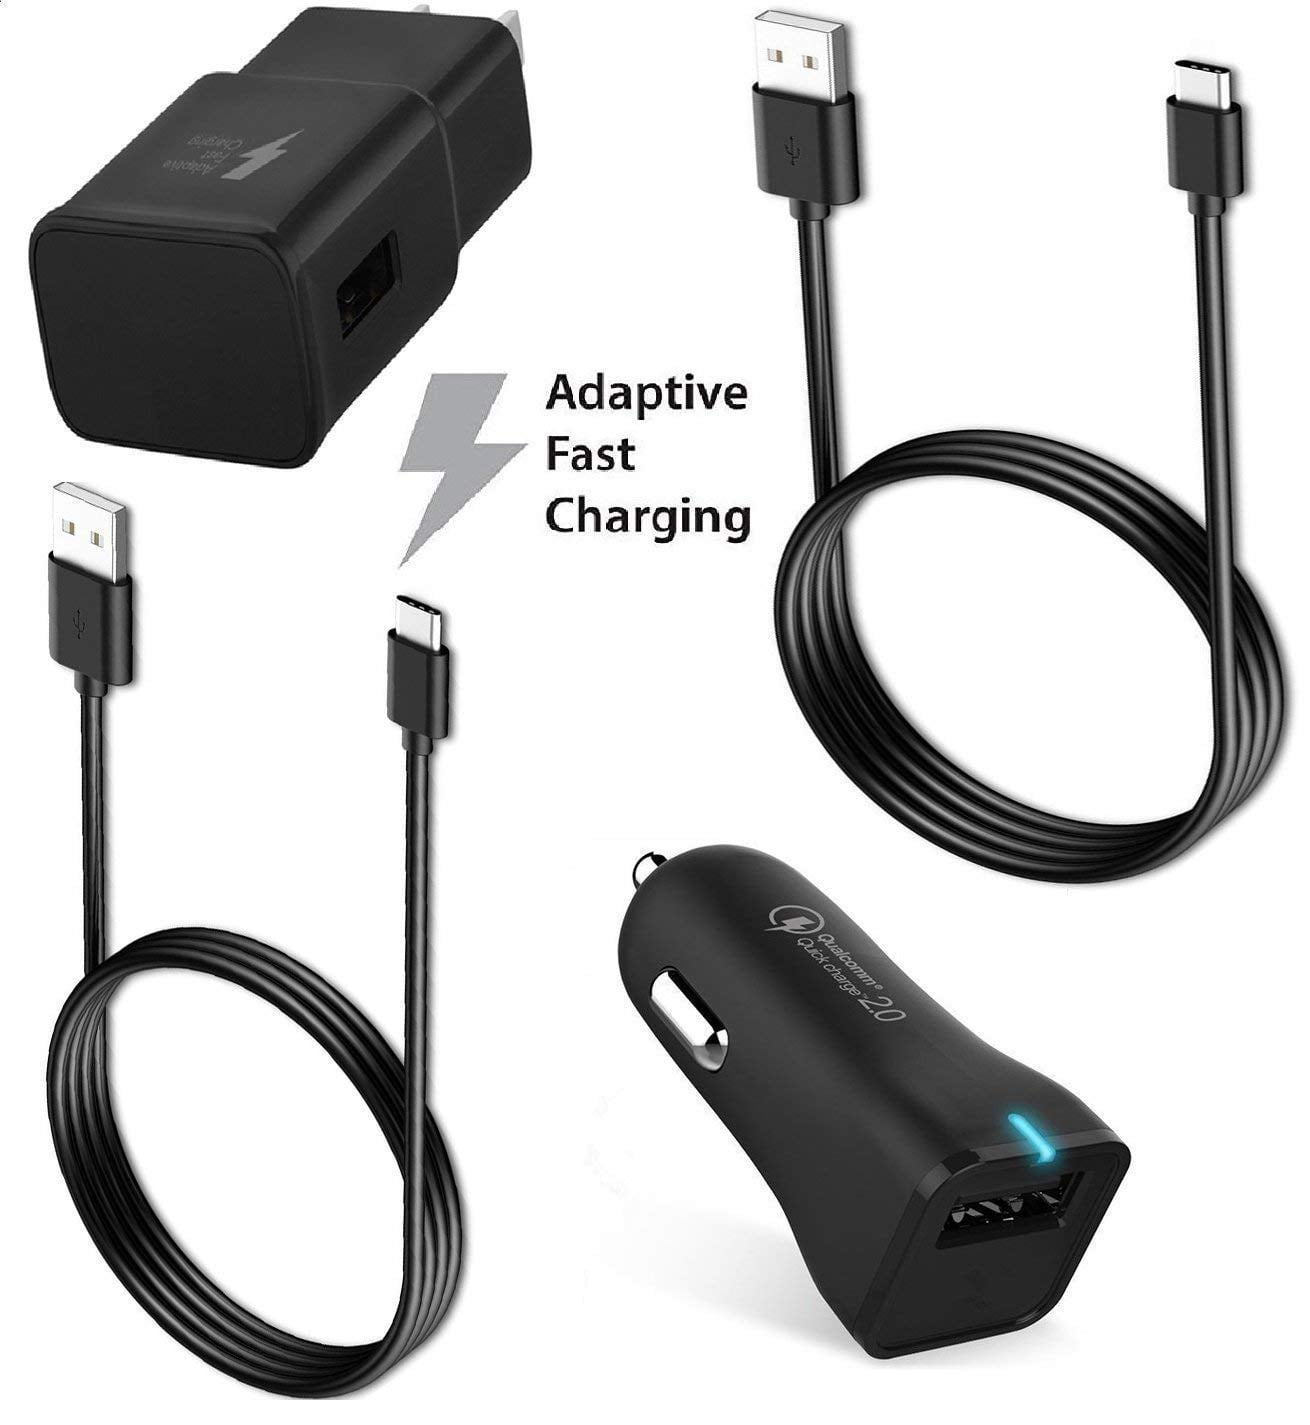 Charging 3A Fast Charge Quick Charger Type C Cord Compatible with Samsung Galaxy S9 S8 Plus S10 Note 10 9 8 Sony XZ LG V20 / G5 / G6 and More 4-Pack 6ft USB Type C Cable, 